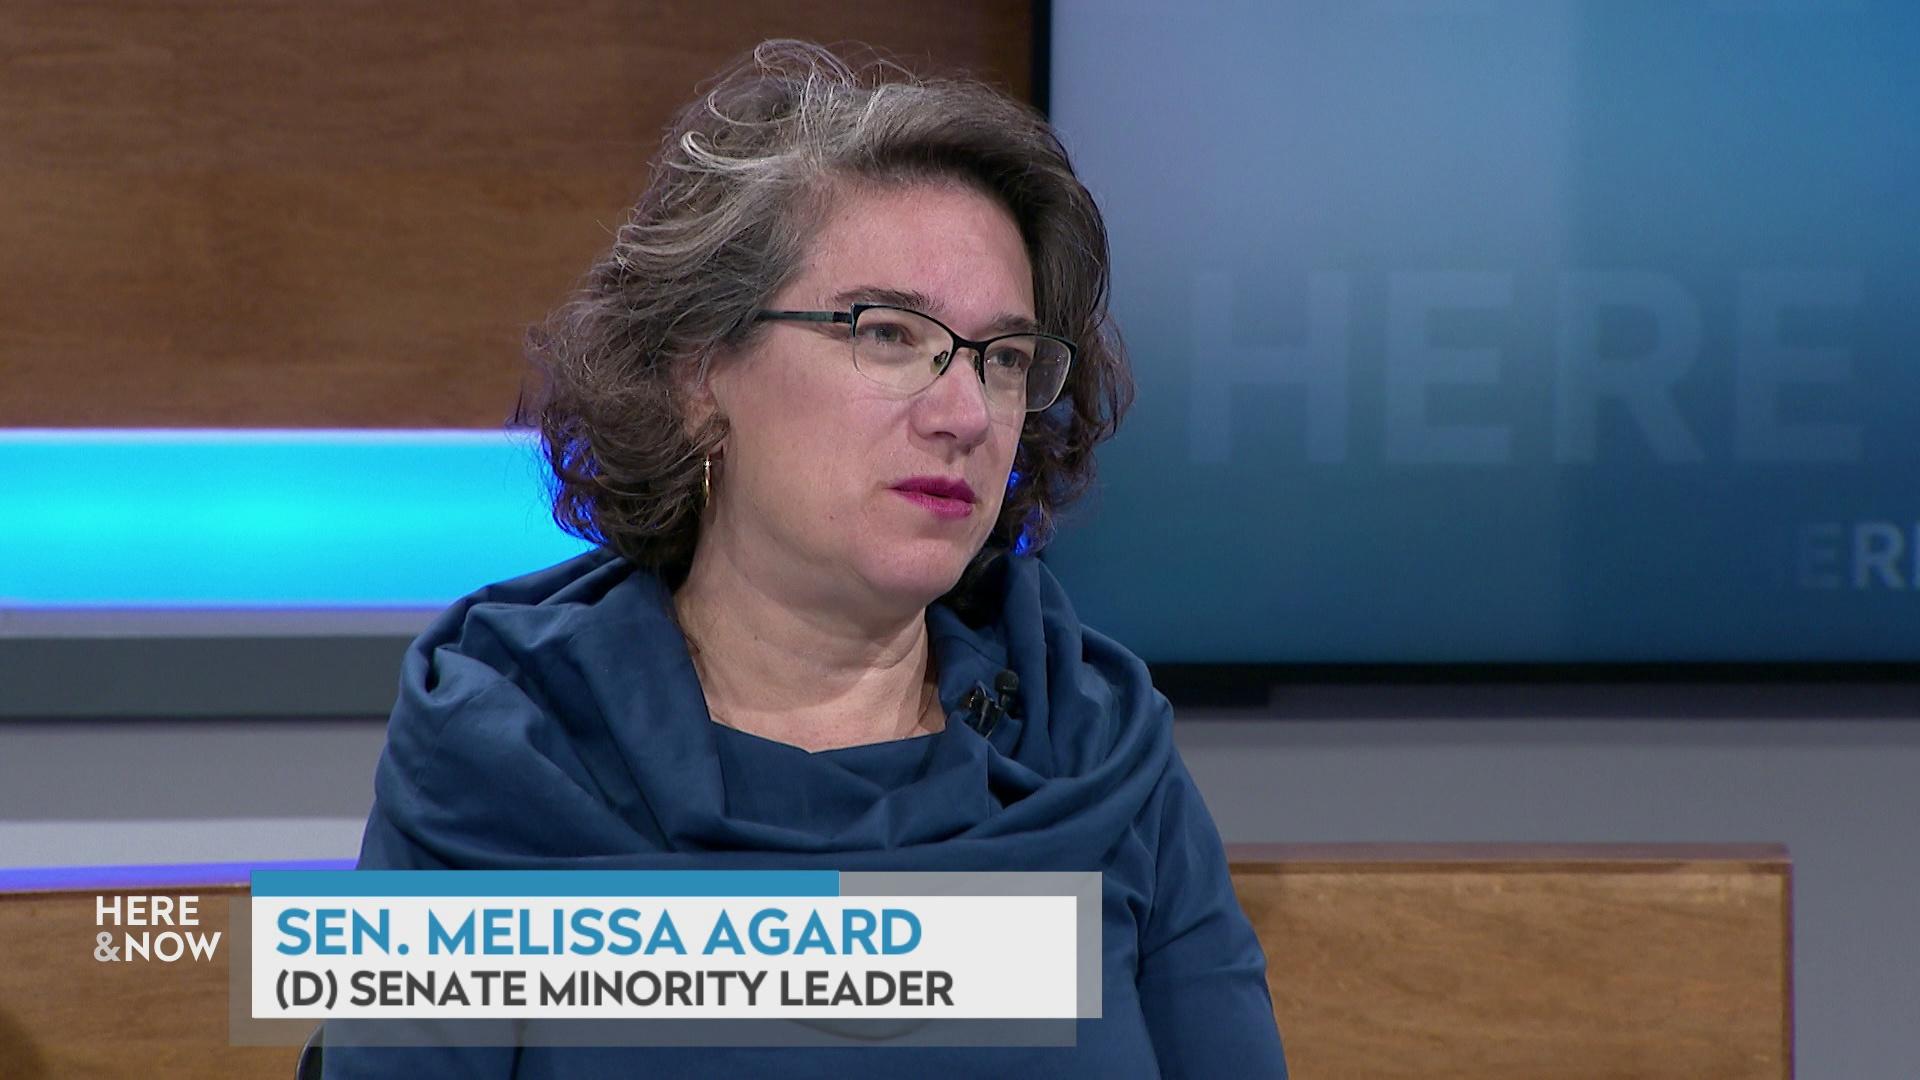 A still image shows Melissa Agard seated at the 'Here & Now' set featuring wood paneling, with a graphic at bottom reading 'Sen. Melissa Agard' and '(D) Senate Minority Leader.'